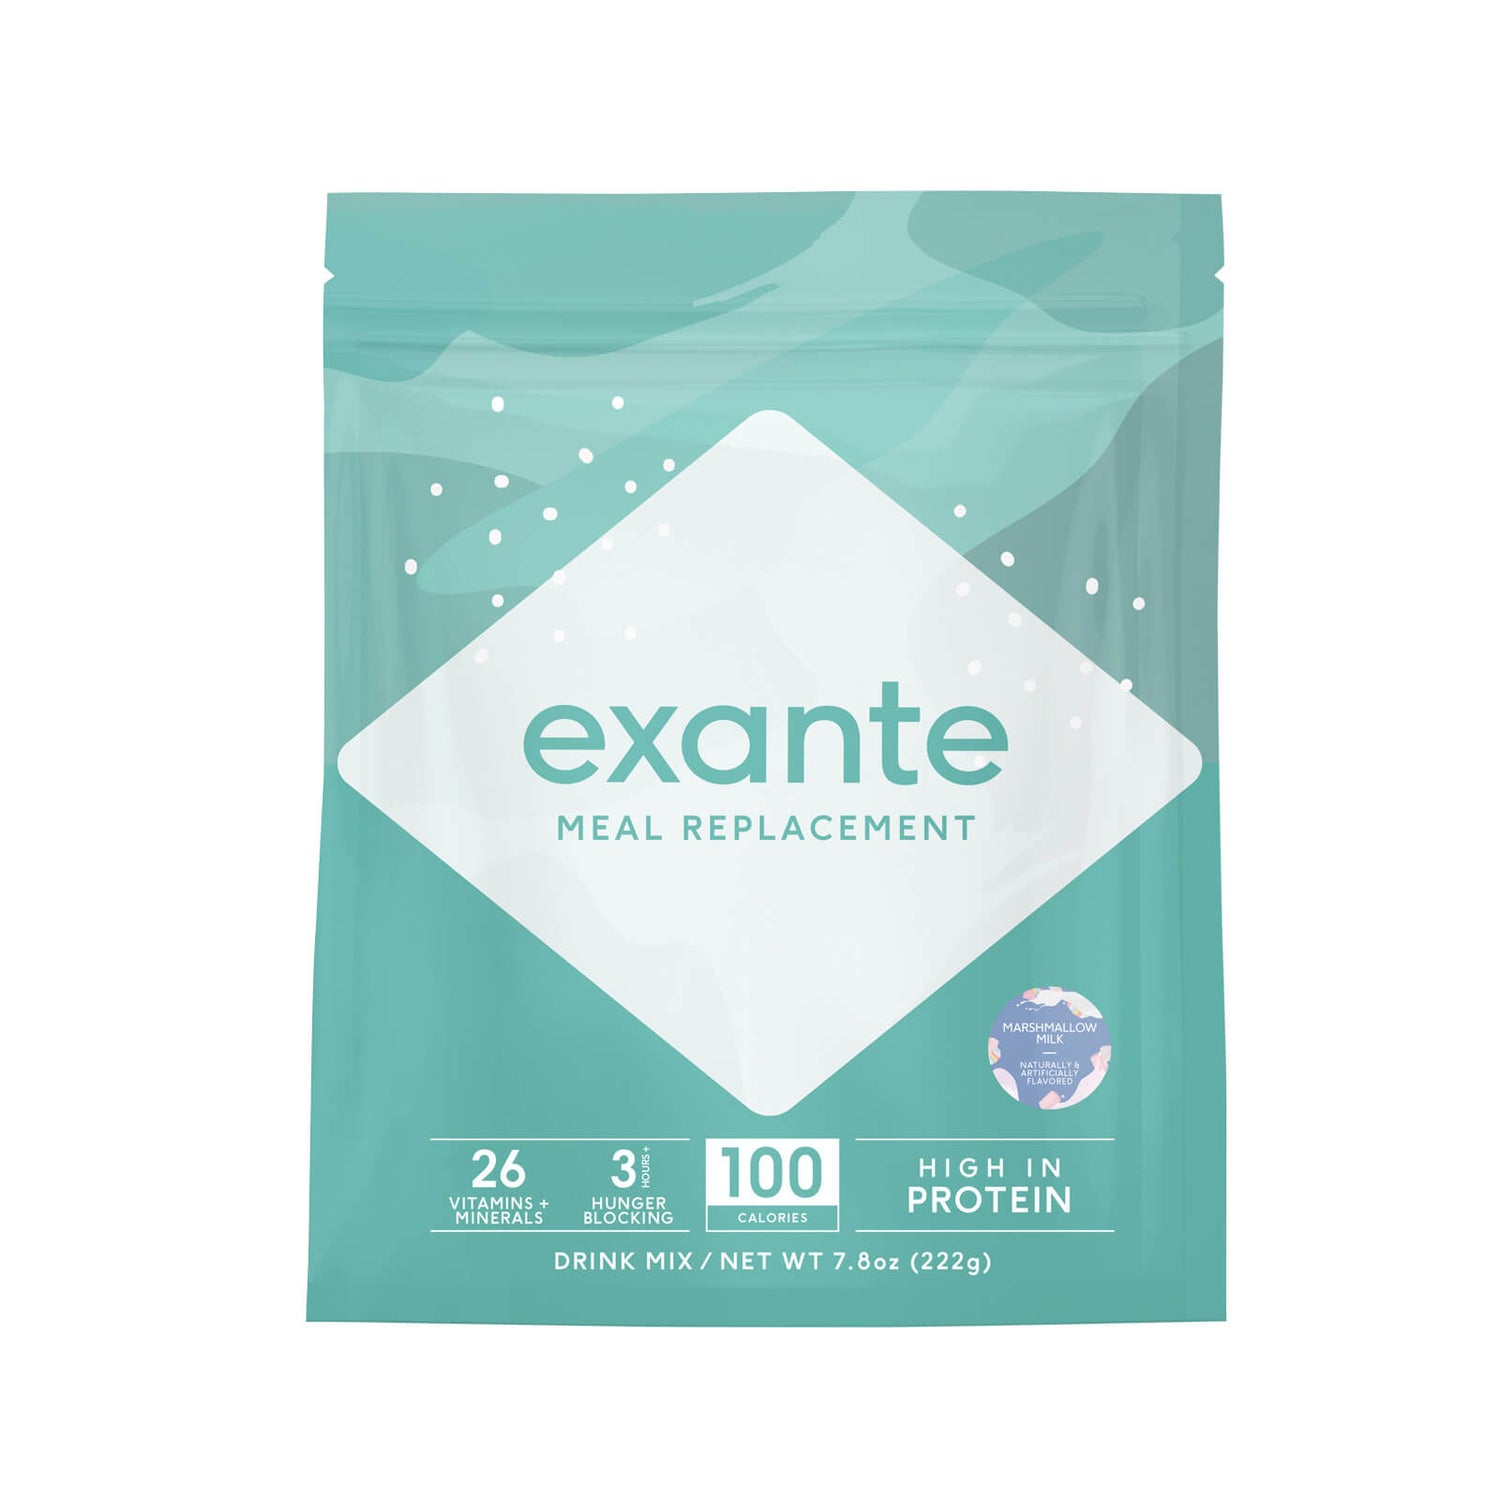 Exante Diet Meal Replacement Shake Marshmallow Cereal Pouch- 7 Svg (USA)